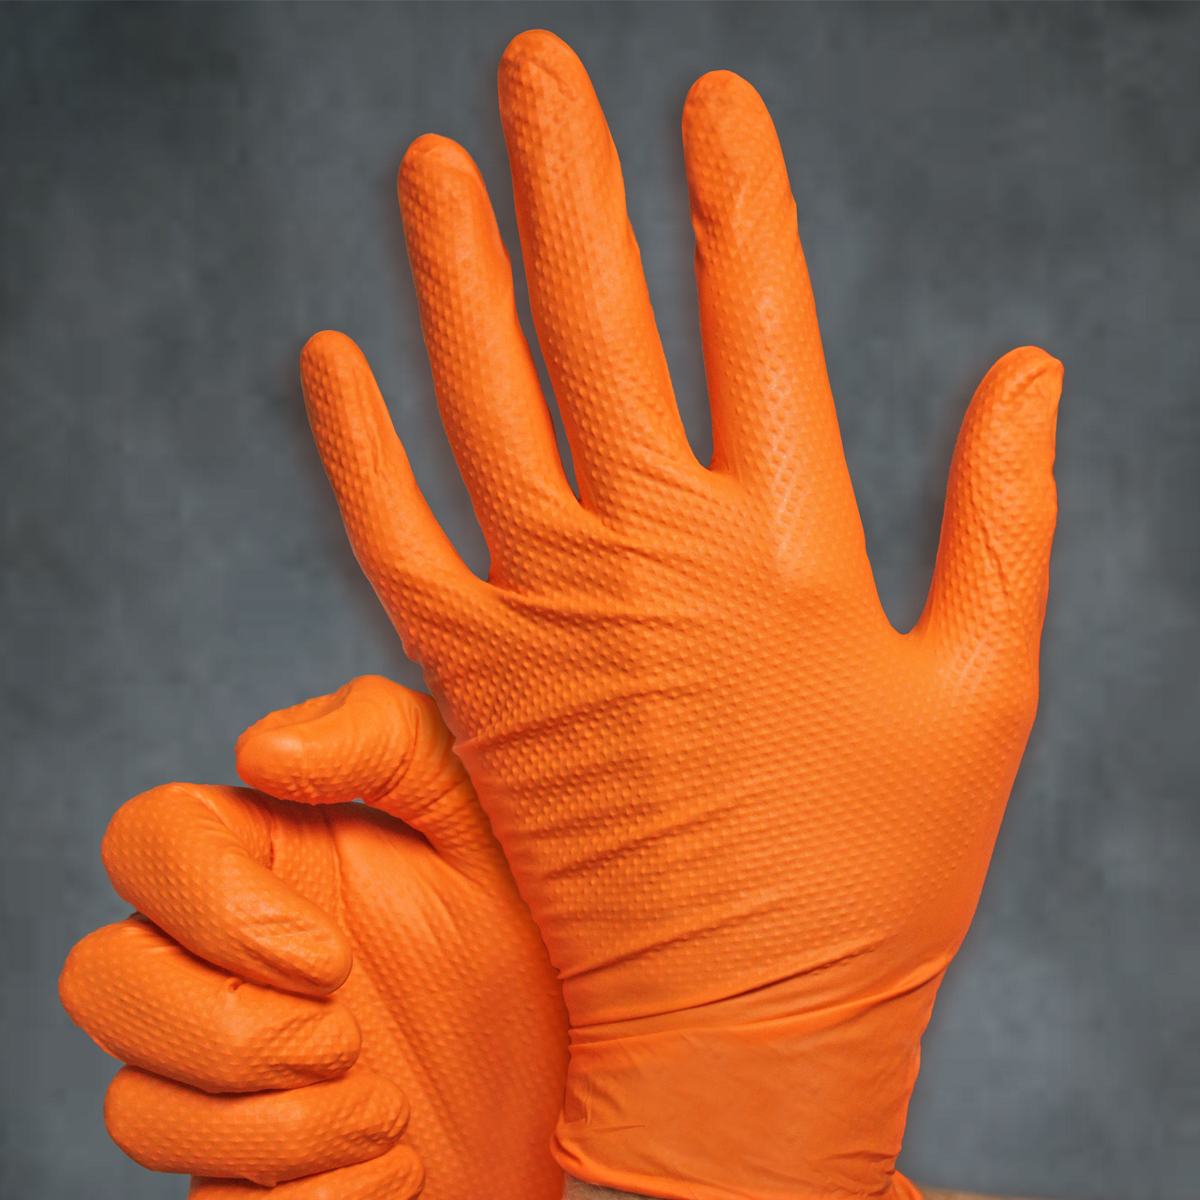 Catch® Orange Nitrile Disposable Powder Free Gloves with Pyramid Grip® Texture Large 10 boxes/case